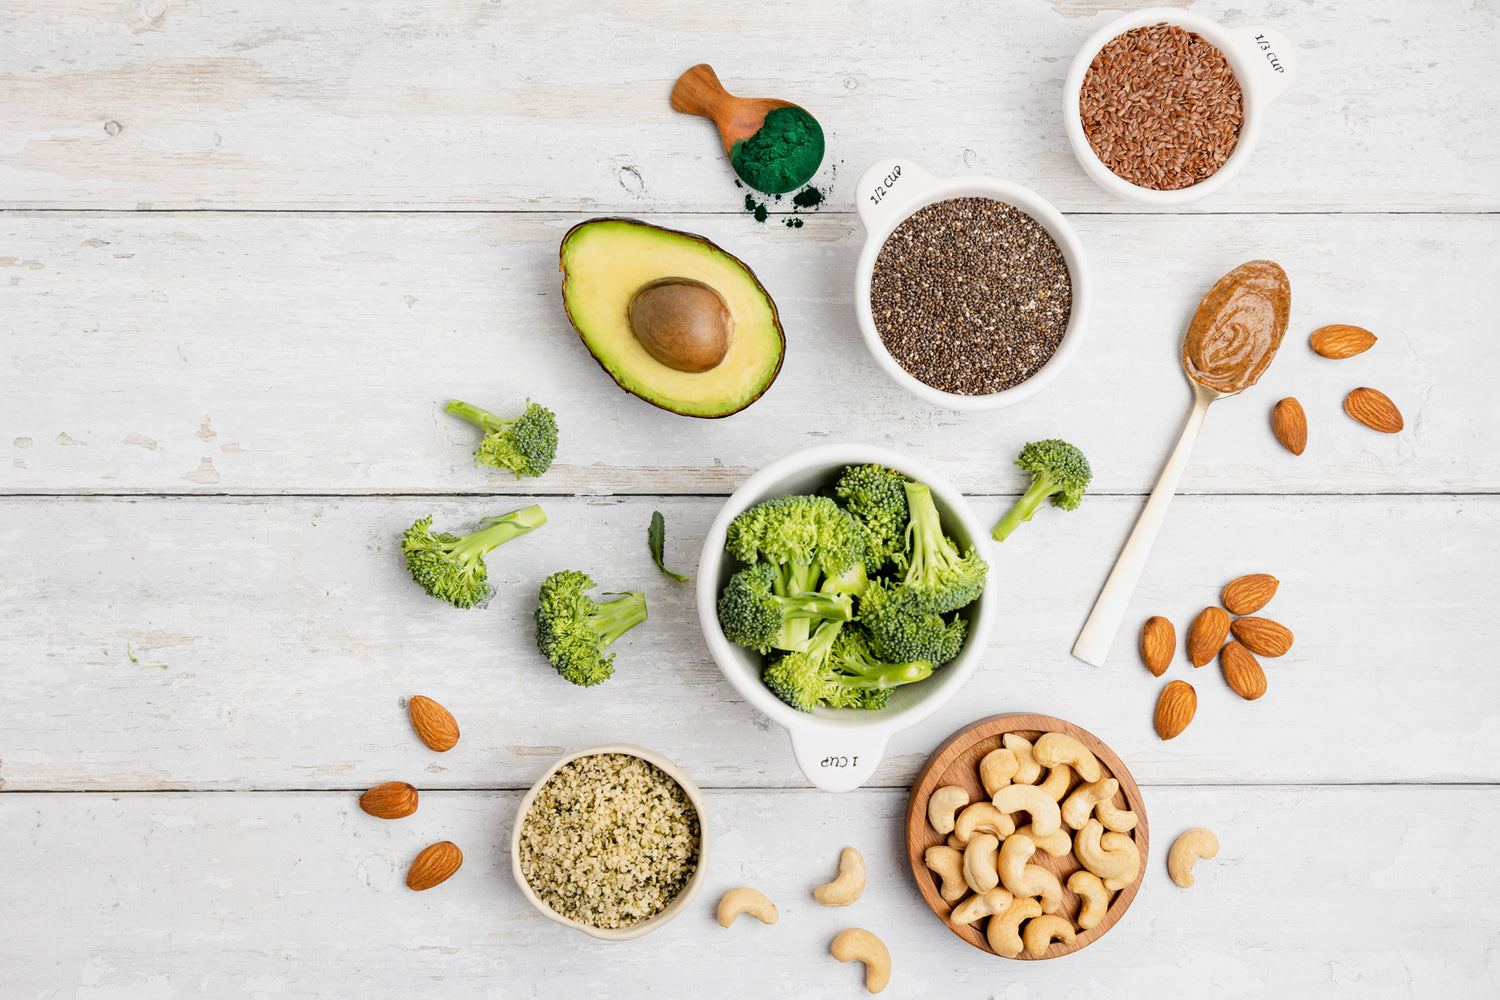 10 Superfoods to Fill Nutrient Gaps for Kids